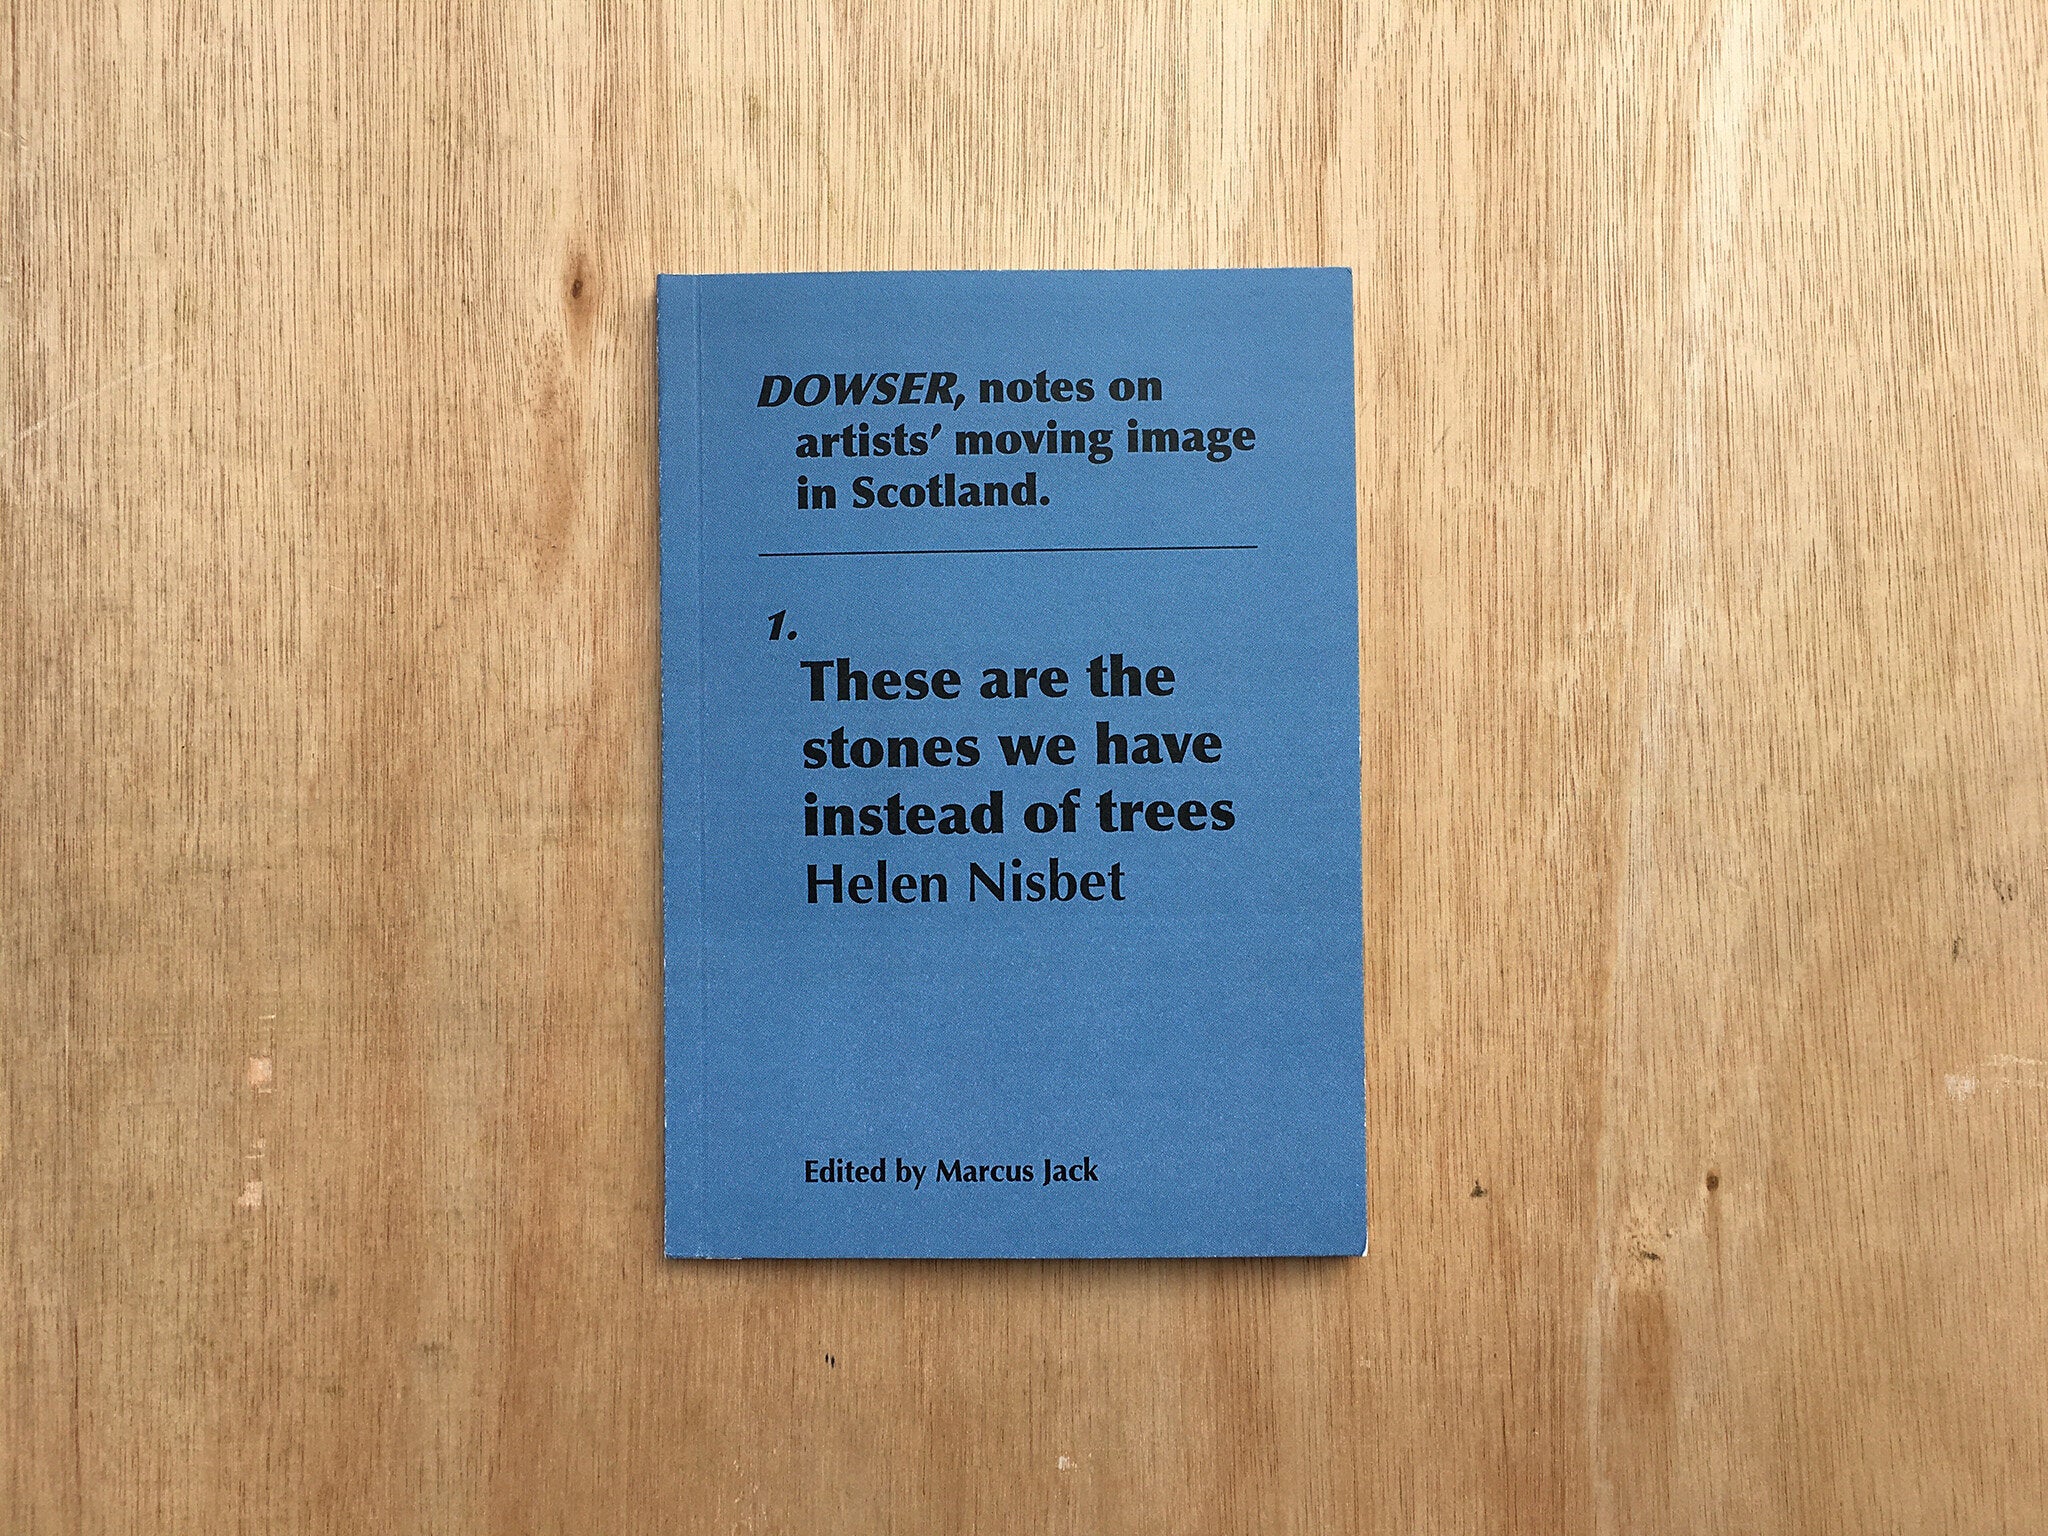 DOWSER ISSUE 1: THESE ARE THE STONES WE HAVE INSTEAD OF TREES by Helen Nisbet